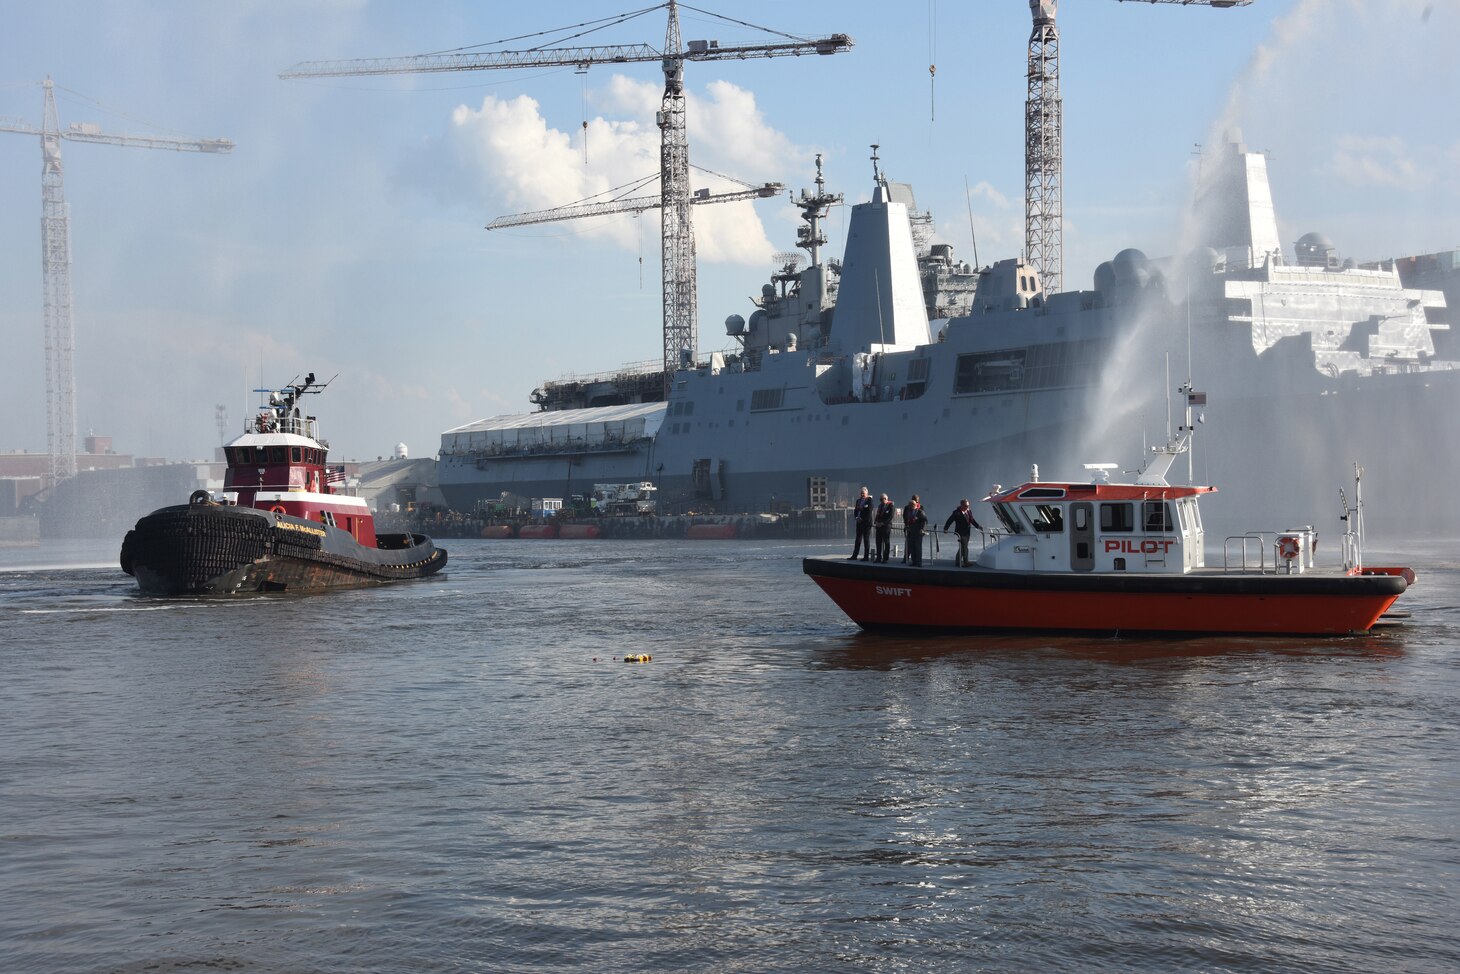 Officials conducted a ‘wreath laying’ ceremony and water salute in downtown Norfolk, Virginia, May 19, during a ceremony held for National Maritime Day.